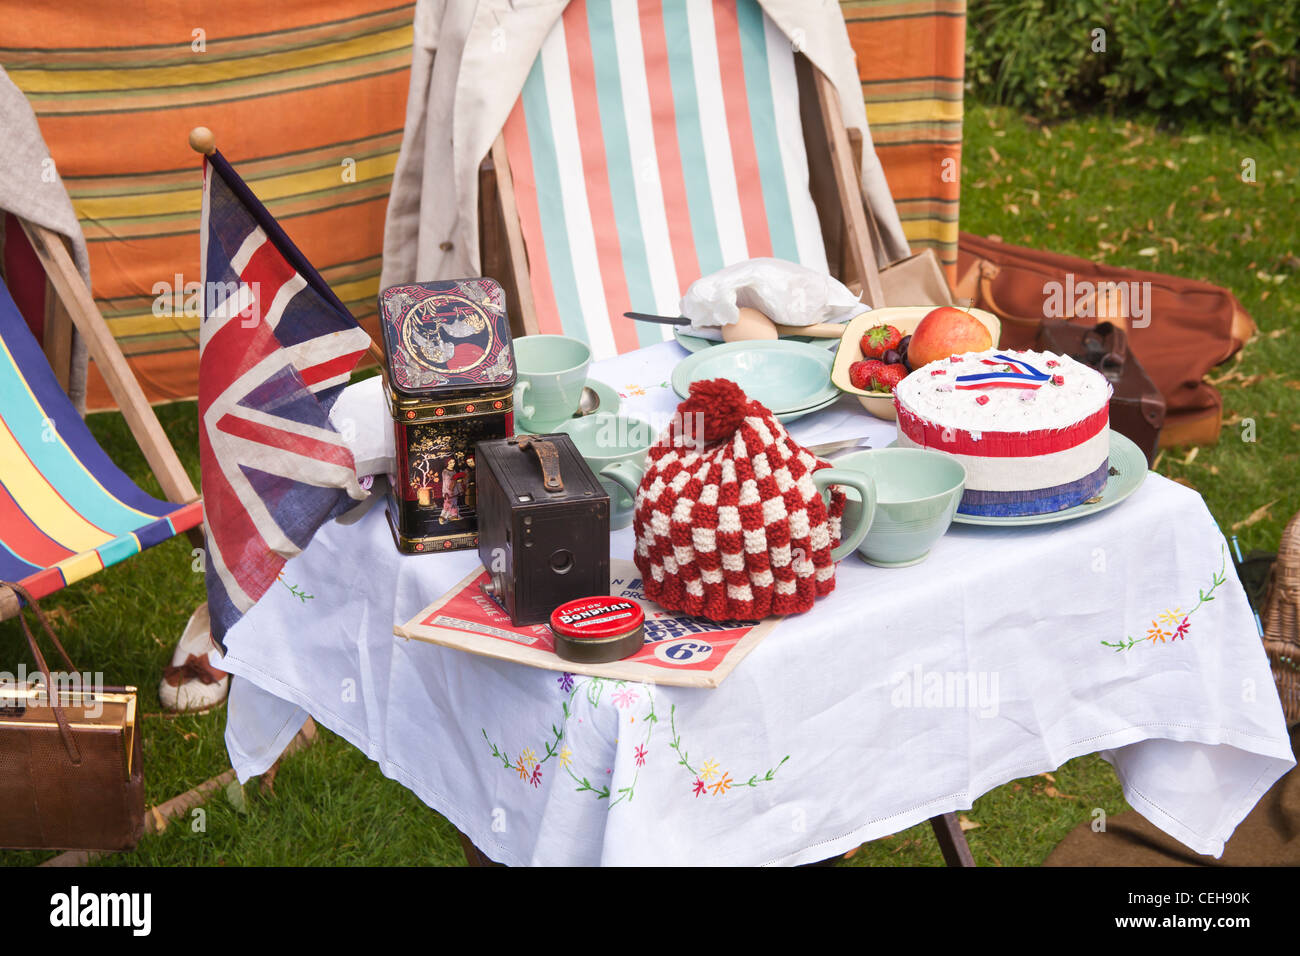 English tea party celebrating the queen's jubilee with nostalgic items on the table Stock Photo